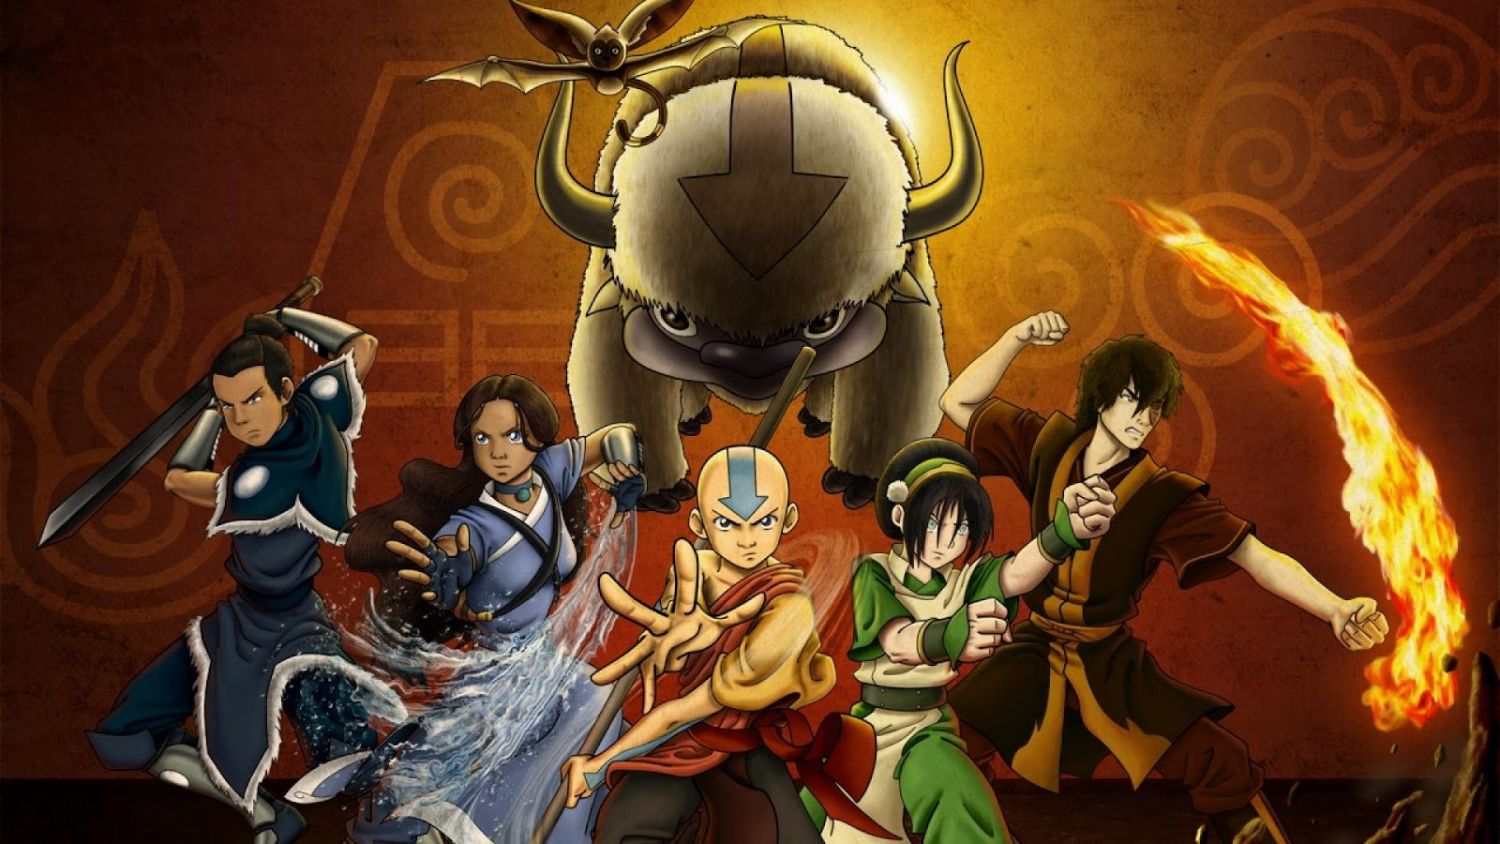 Avatar The Last Airbender Unaired Pilot Episode Now Available On YouTube